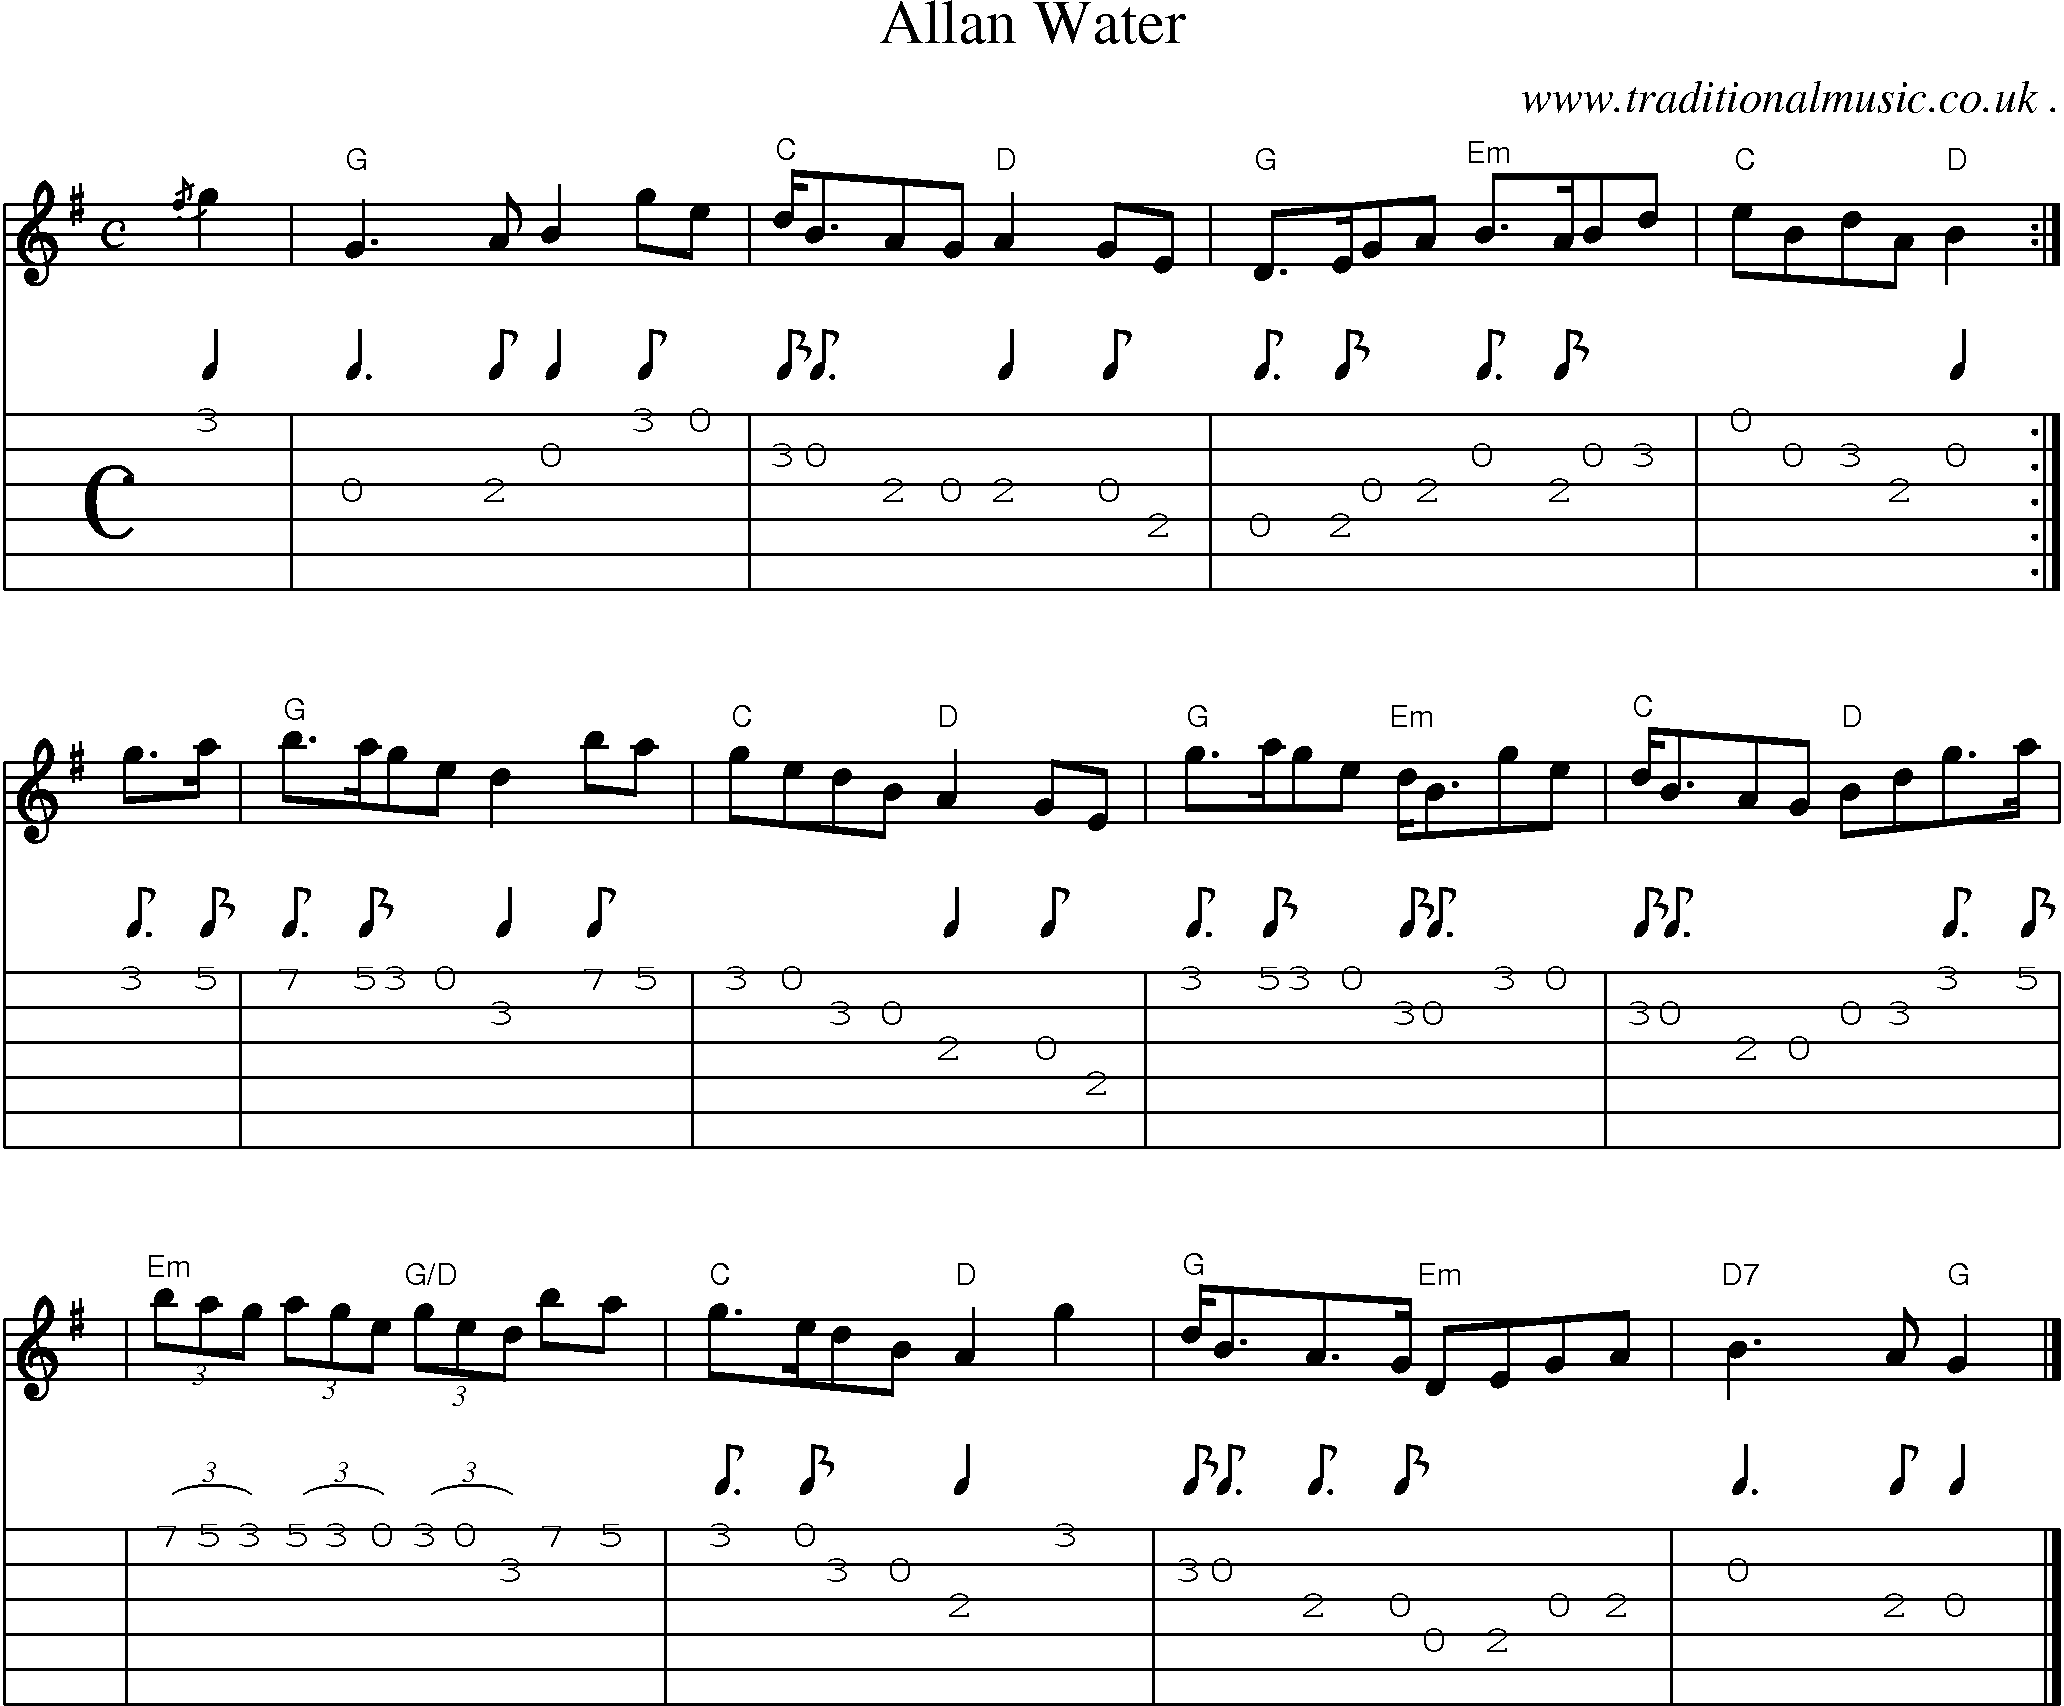 Sheet-music  score, Chords and Guitar Tabs for Allan Water